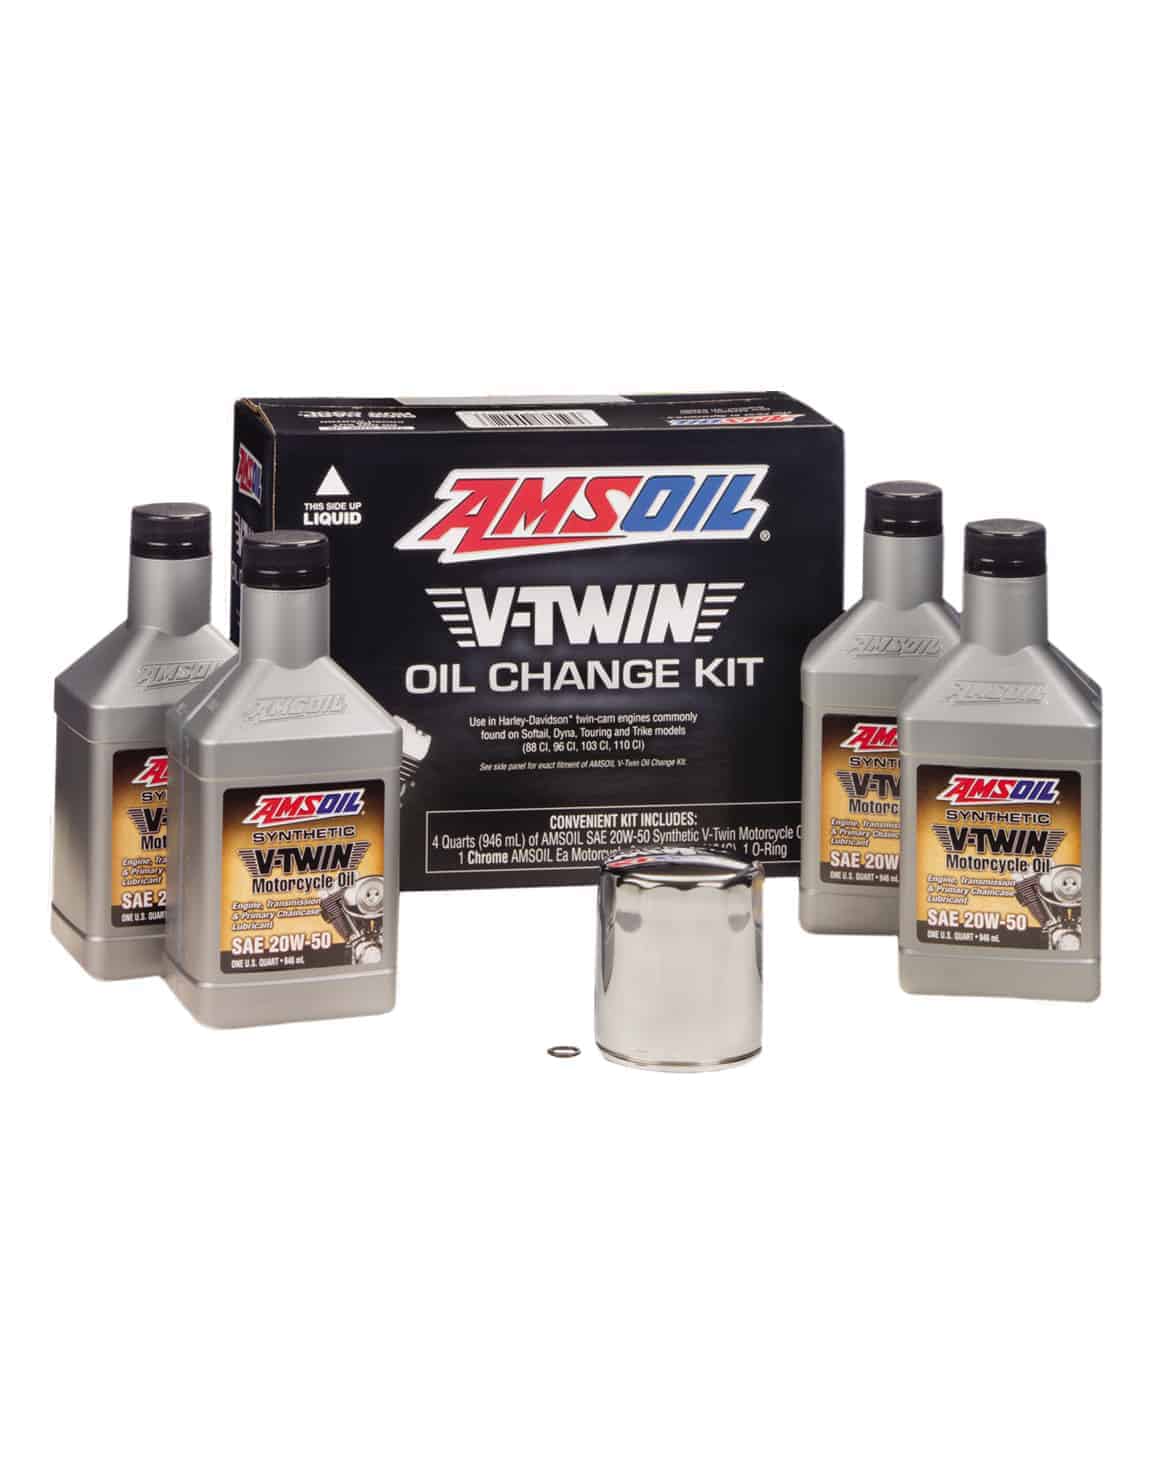 Amsoil SAE 20W-50 Synthetic Motorcycle Oil (MCV)